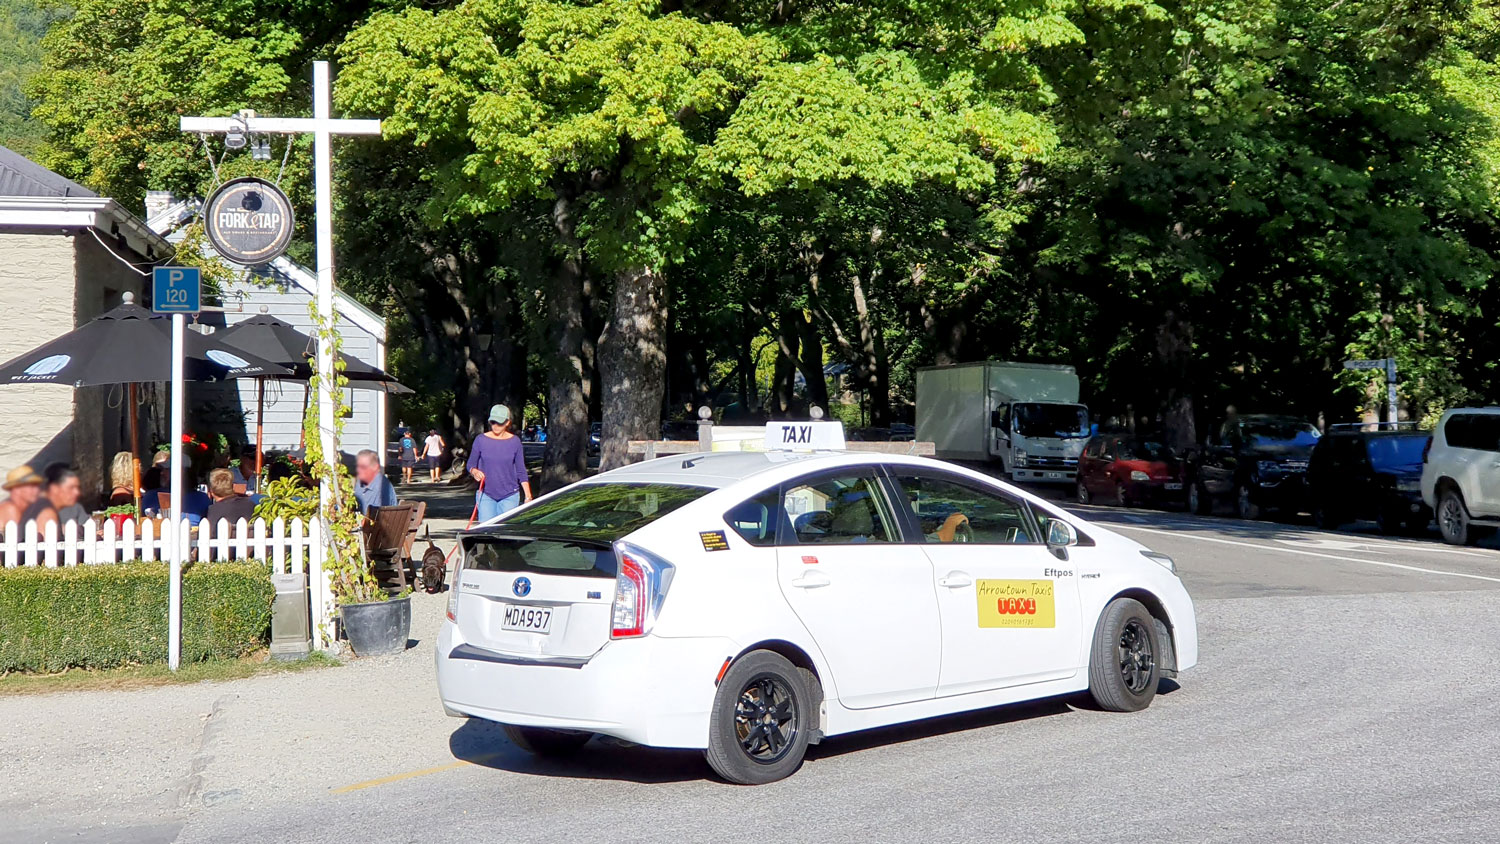 One of the Arrowtown Taxi electric cars outside the Fork and Tap Restaurant in Arrowtown.